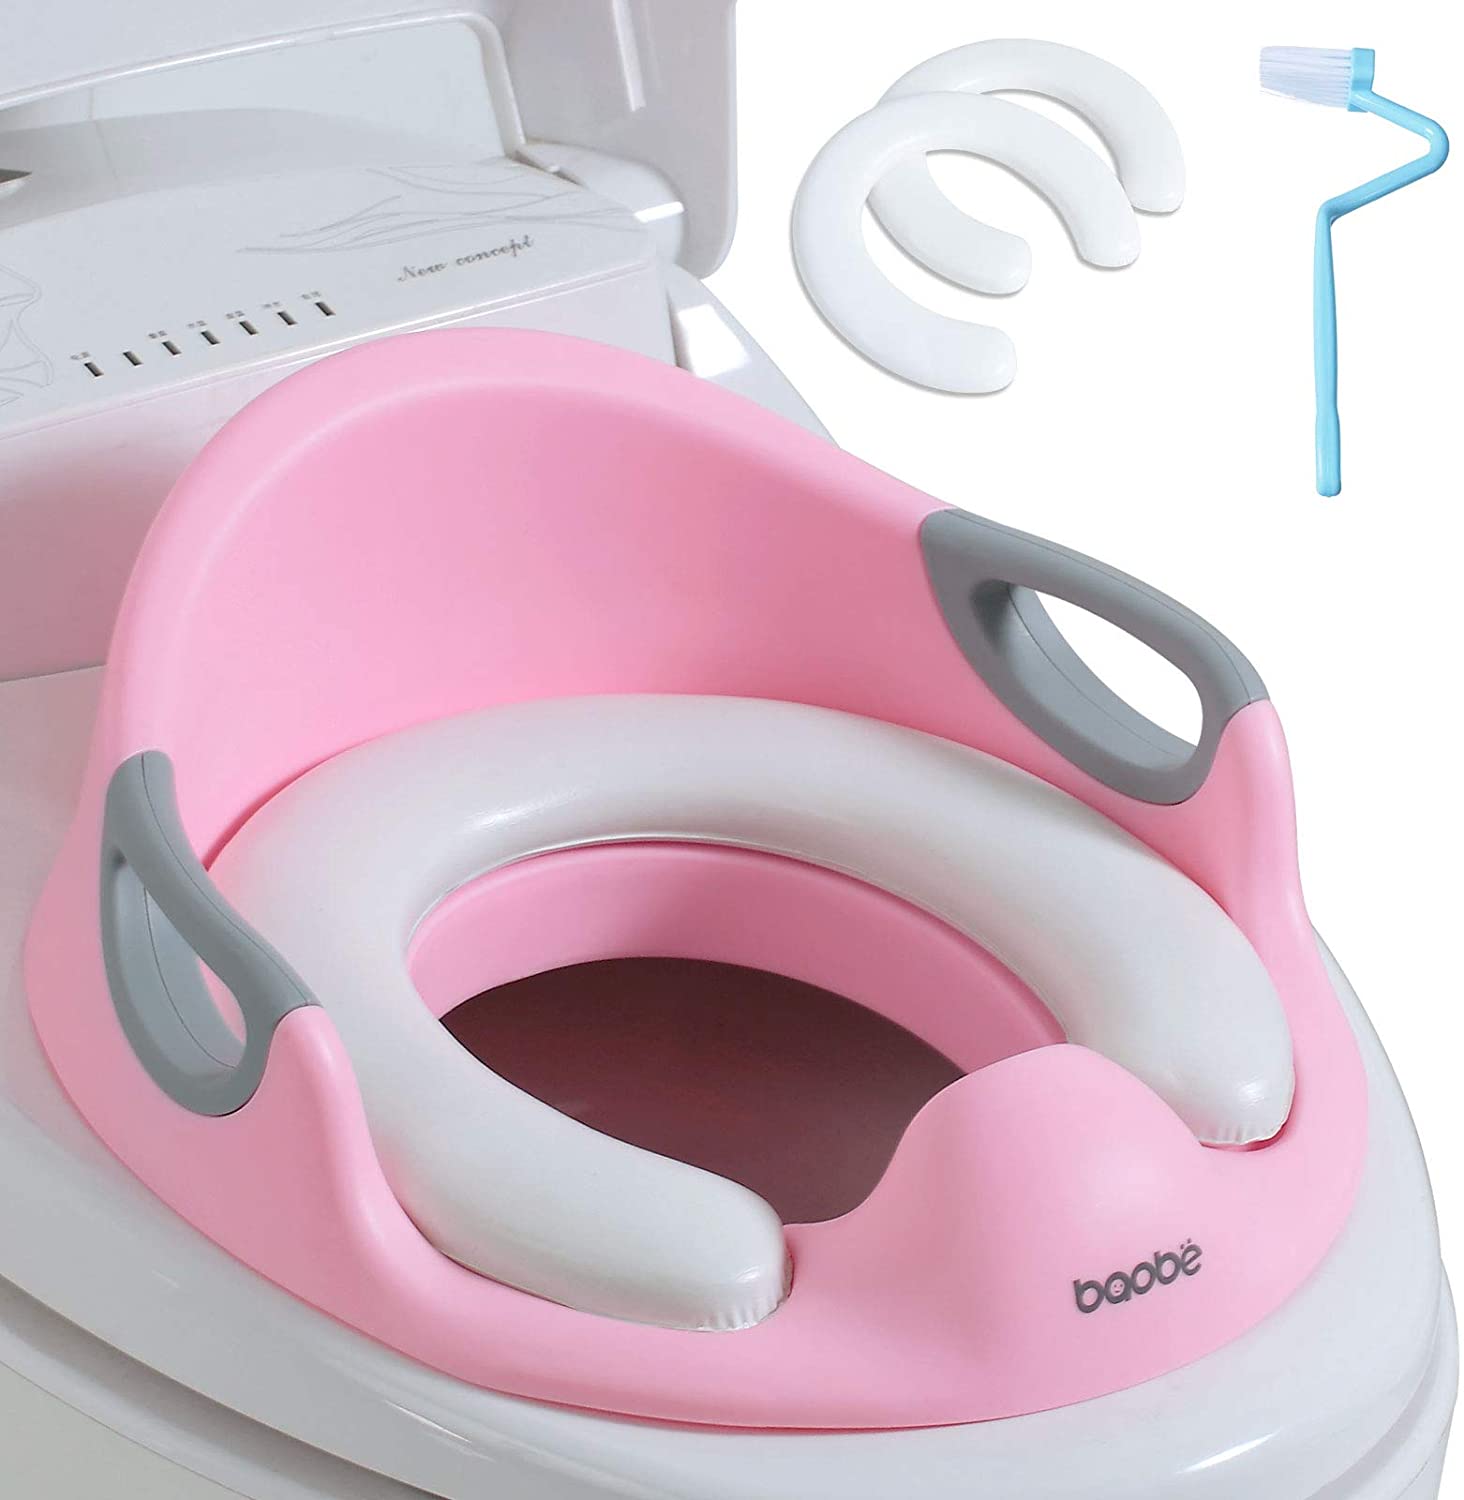 Trending Products Baby Bottle Feeder - Potty Training Seat for Kids Toddlers, Toilet Seat for Baby with Cushion Handle and Backrest, Toilet Trainer for Round and Oval Toilets (Pink) – Ealing